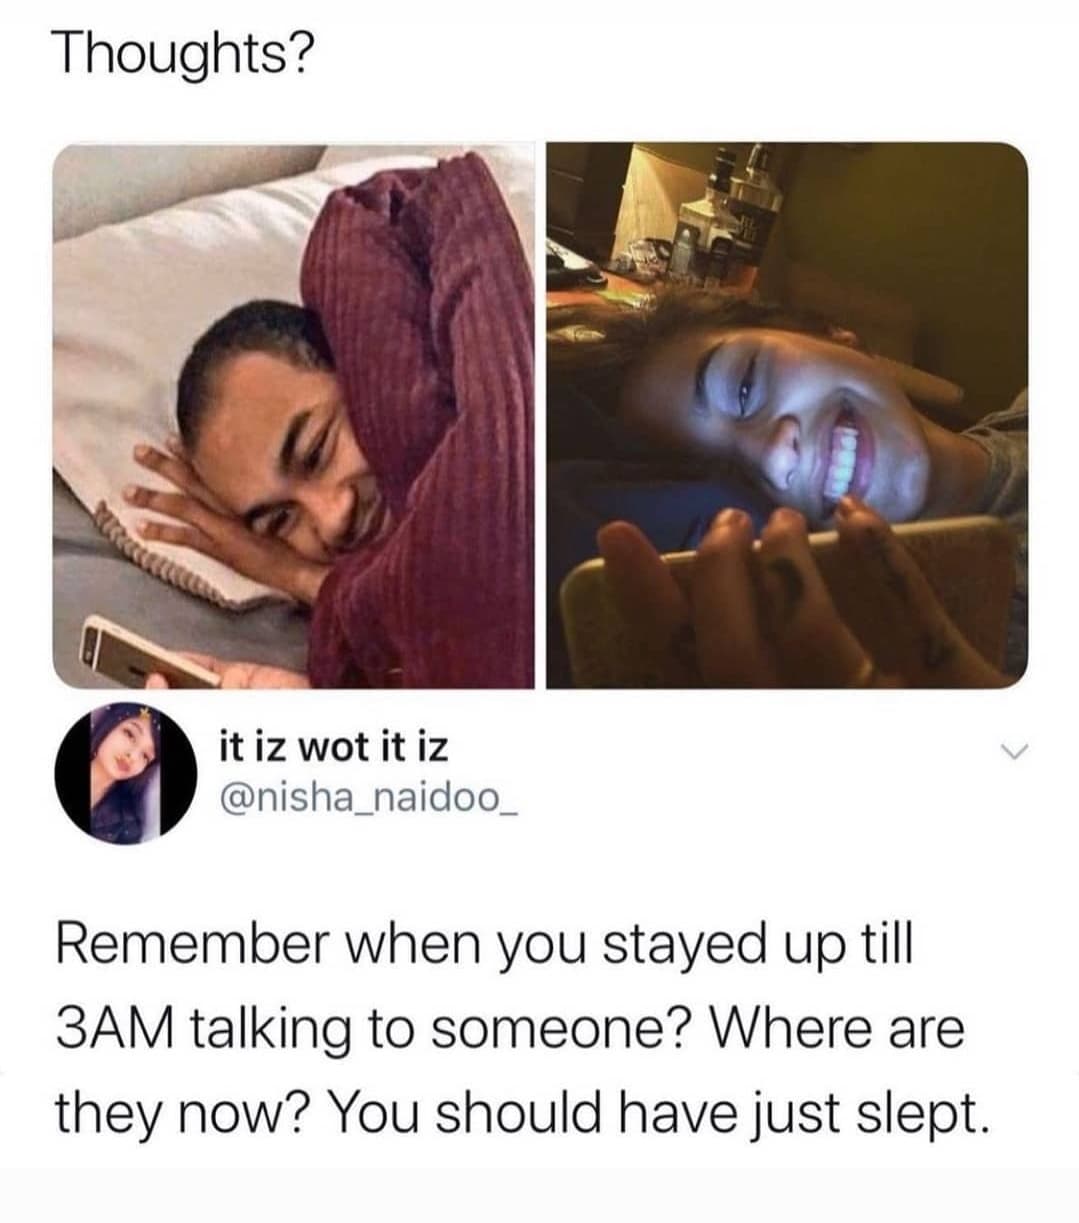 remember when you stayed up till 3am talking - Thoughts? it iz wot it iz Remember when you stayed up till 3AM talking to someone? Where are they now? You should have just slept.